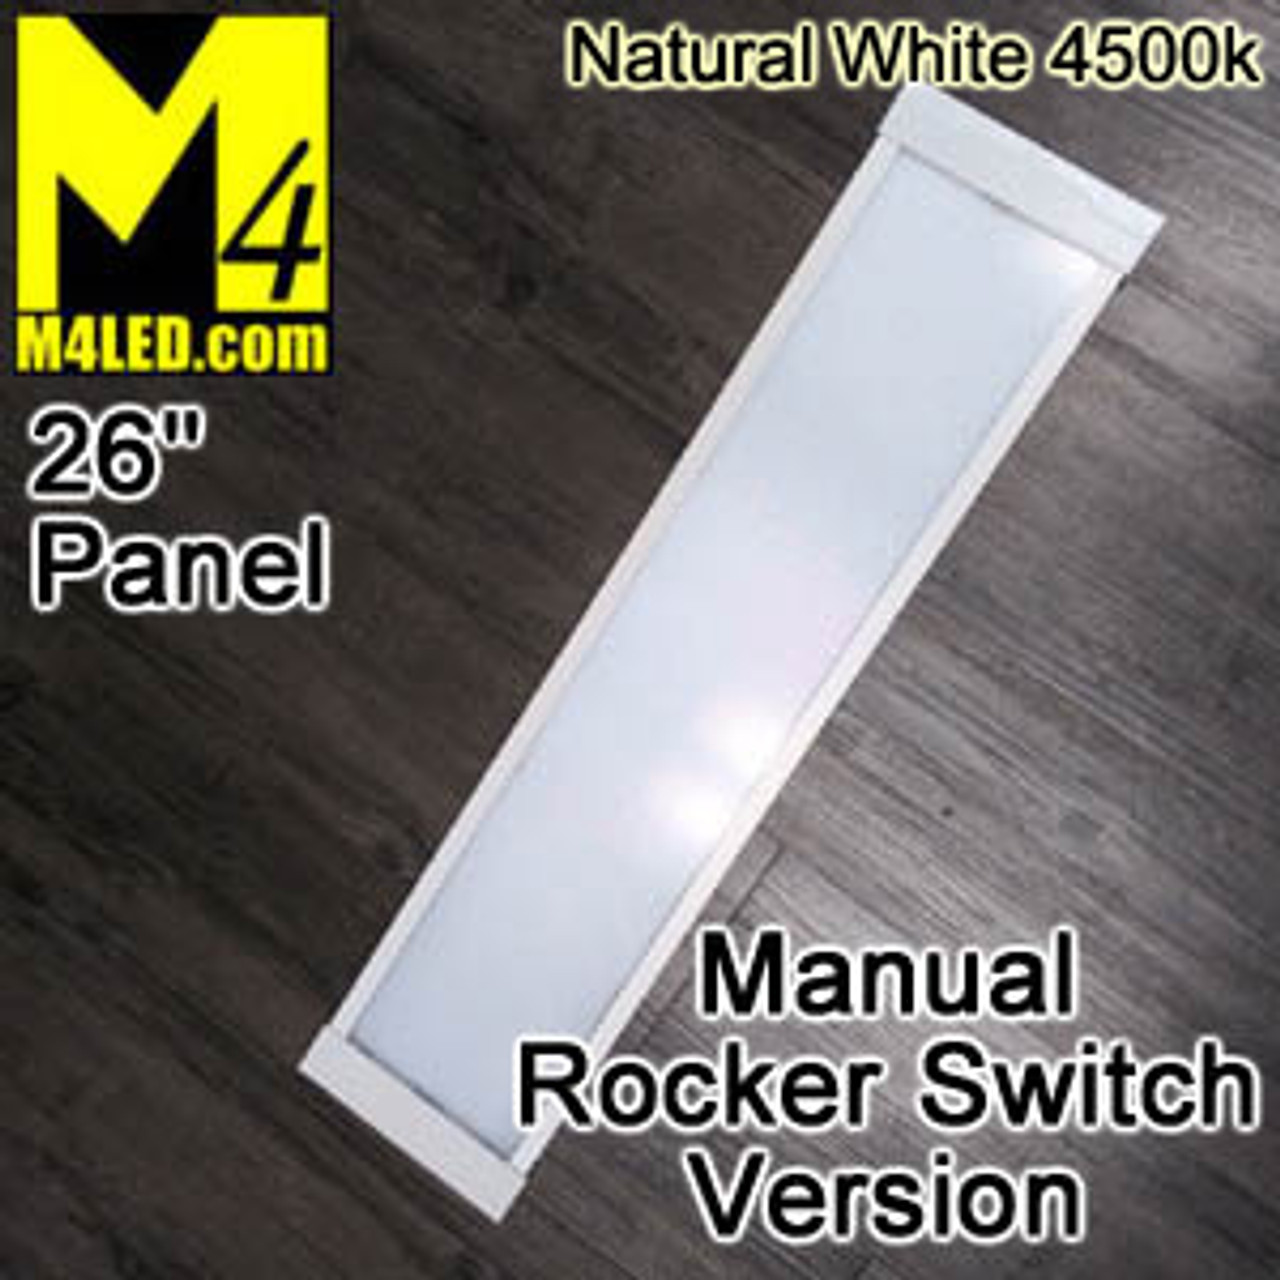 KW-295-660-RS-NW 26" Rocker Switch Panel Light Natural White 4500k